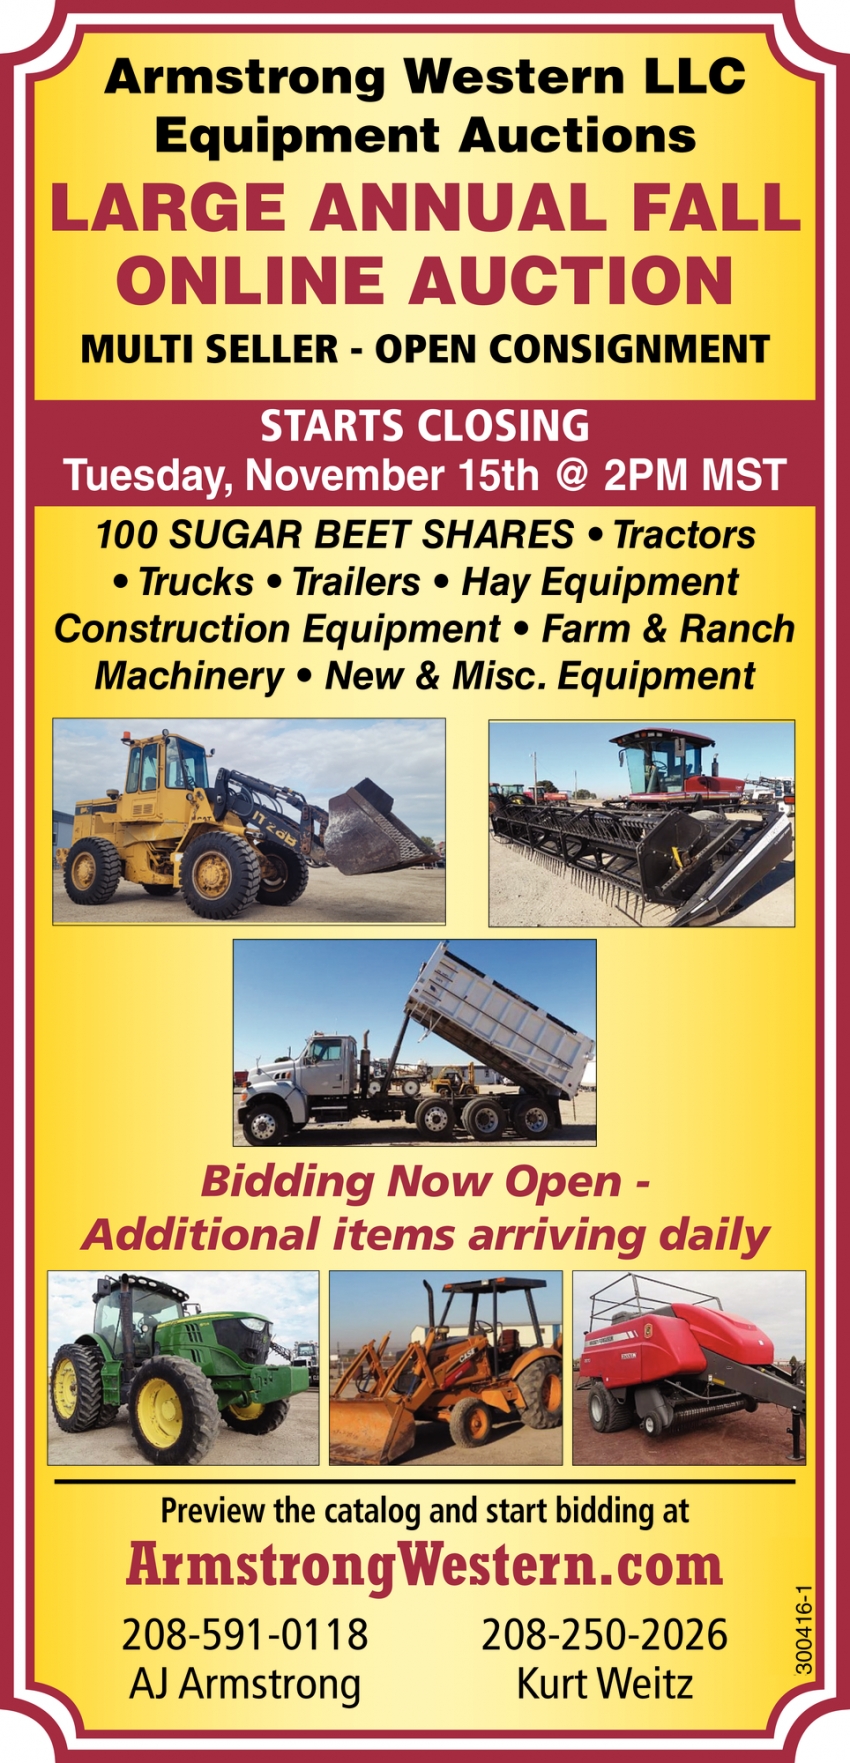 Large Annual Fall Online Auction